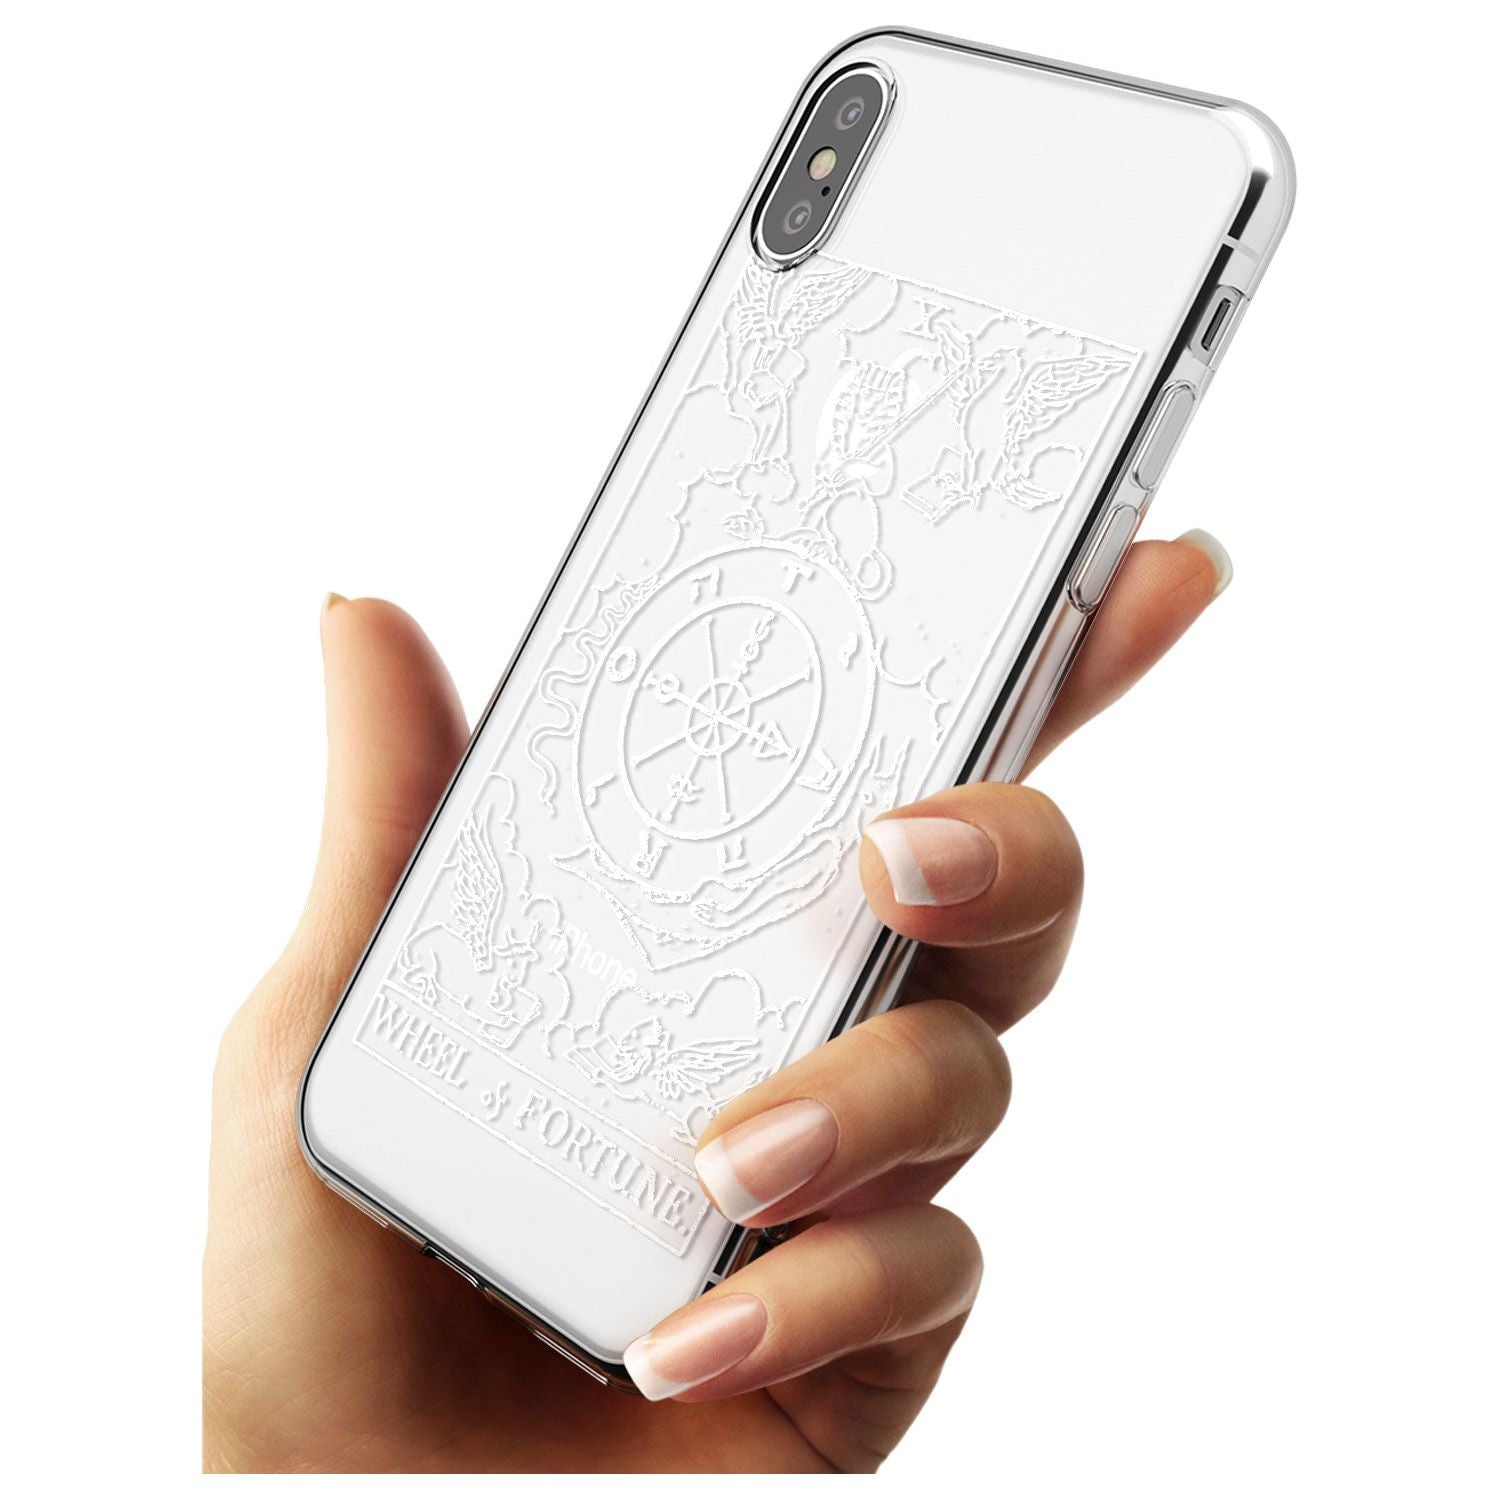 Wheel of Fortune Tarot Card - White Transparent Black Impact Phone Case for iPhone X XS Max XR